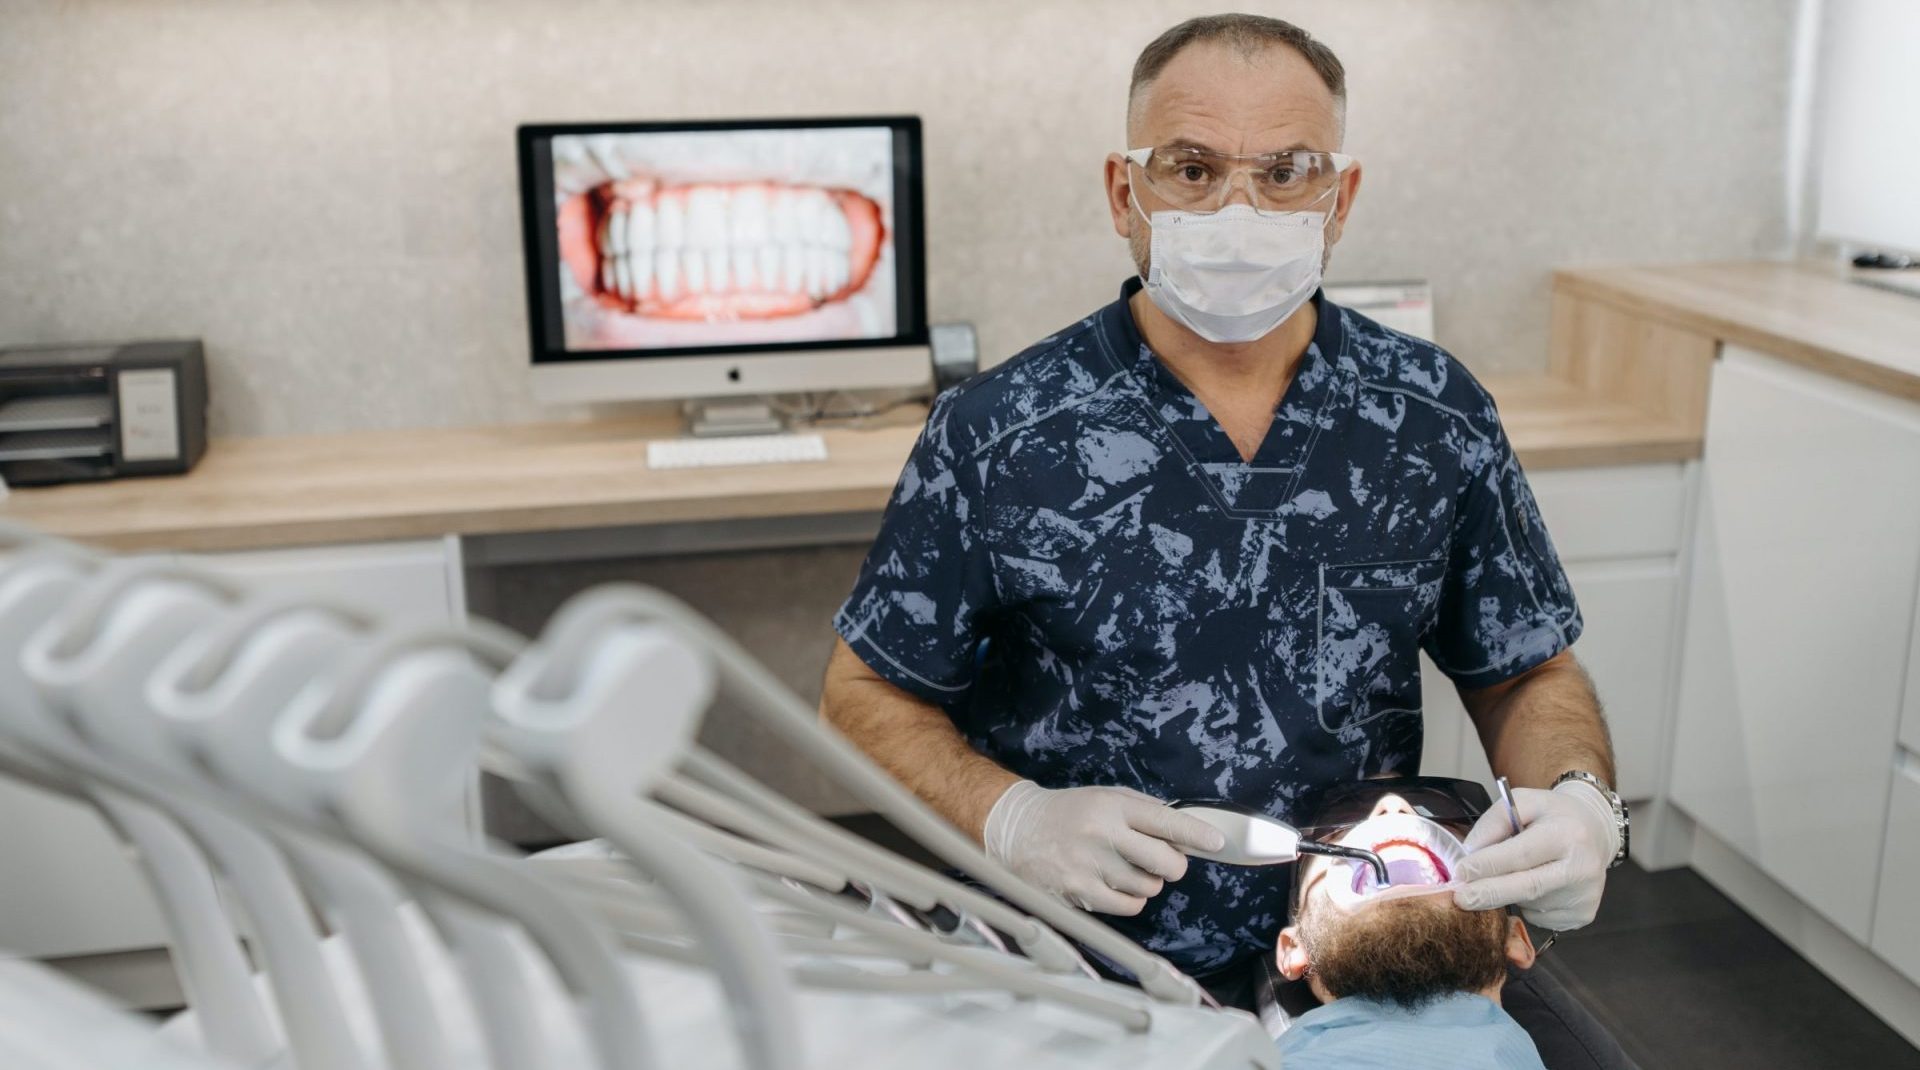 dentist in blue floral shirt working on patient